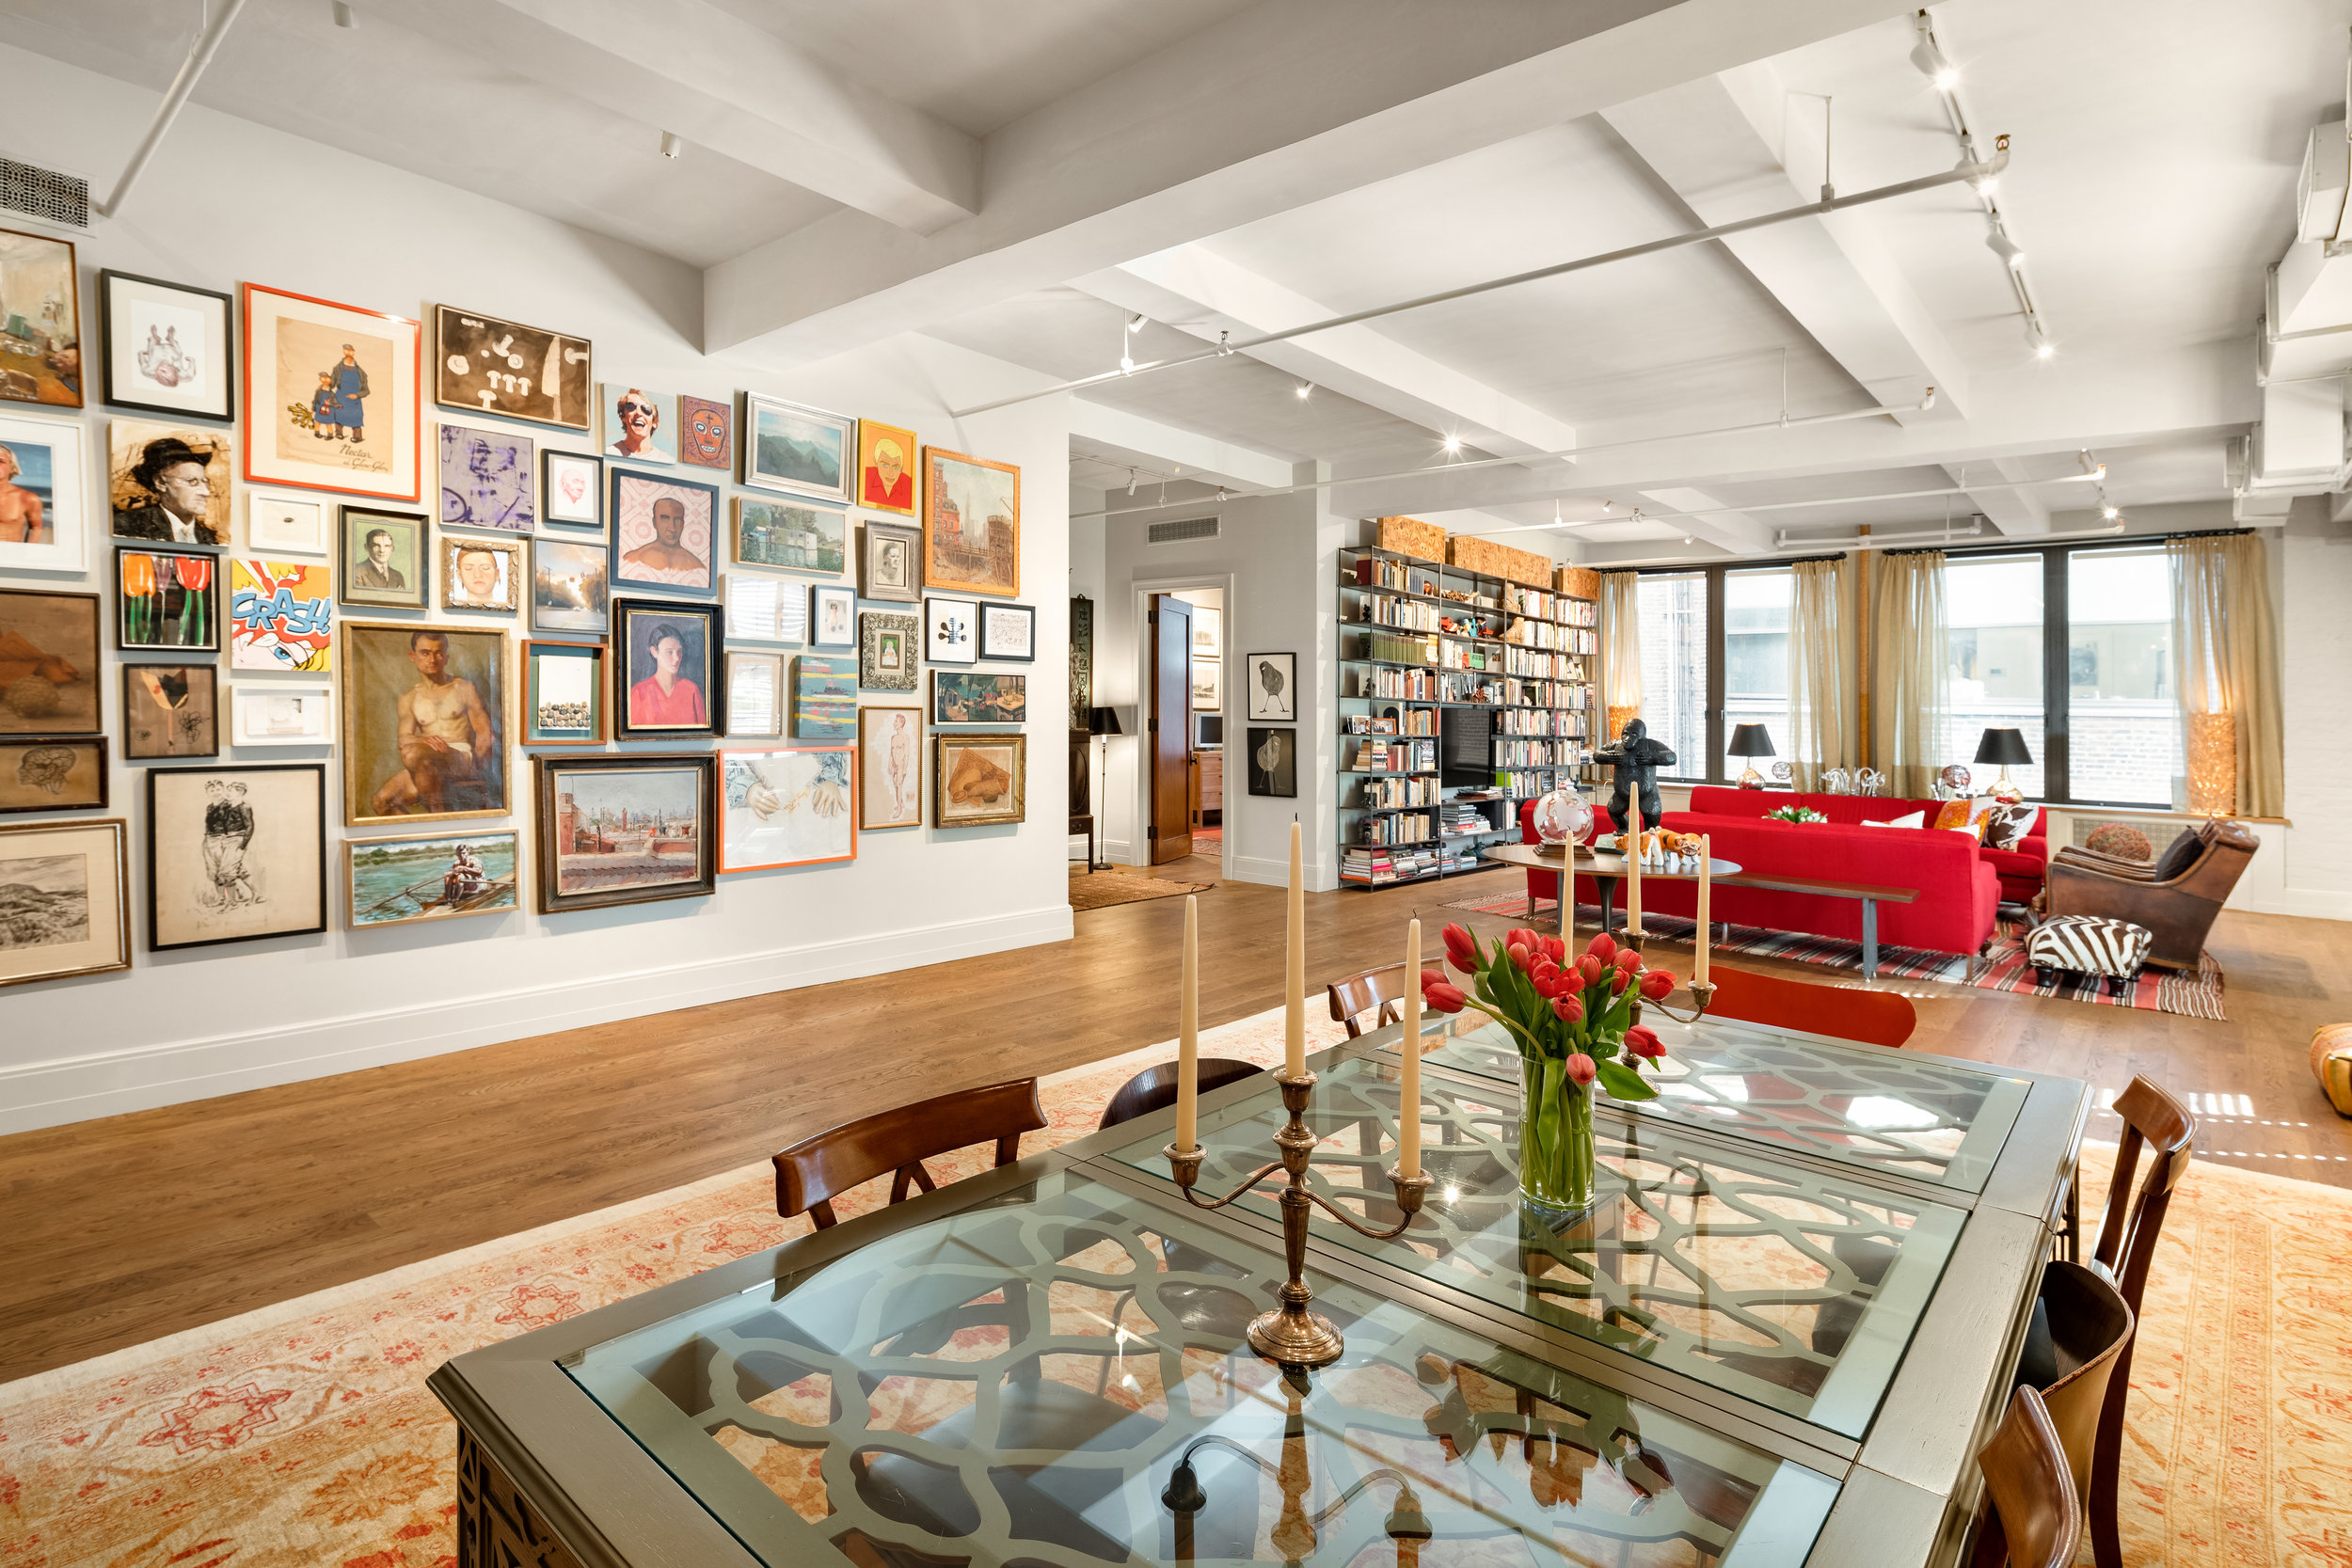 142West26thStreet9-ChelseaNewYork_Holly_Parker_DouglasElliman_Photography_79379619_high_res.jpg